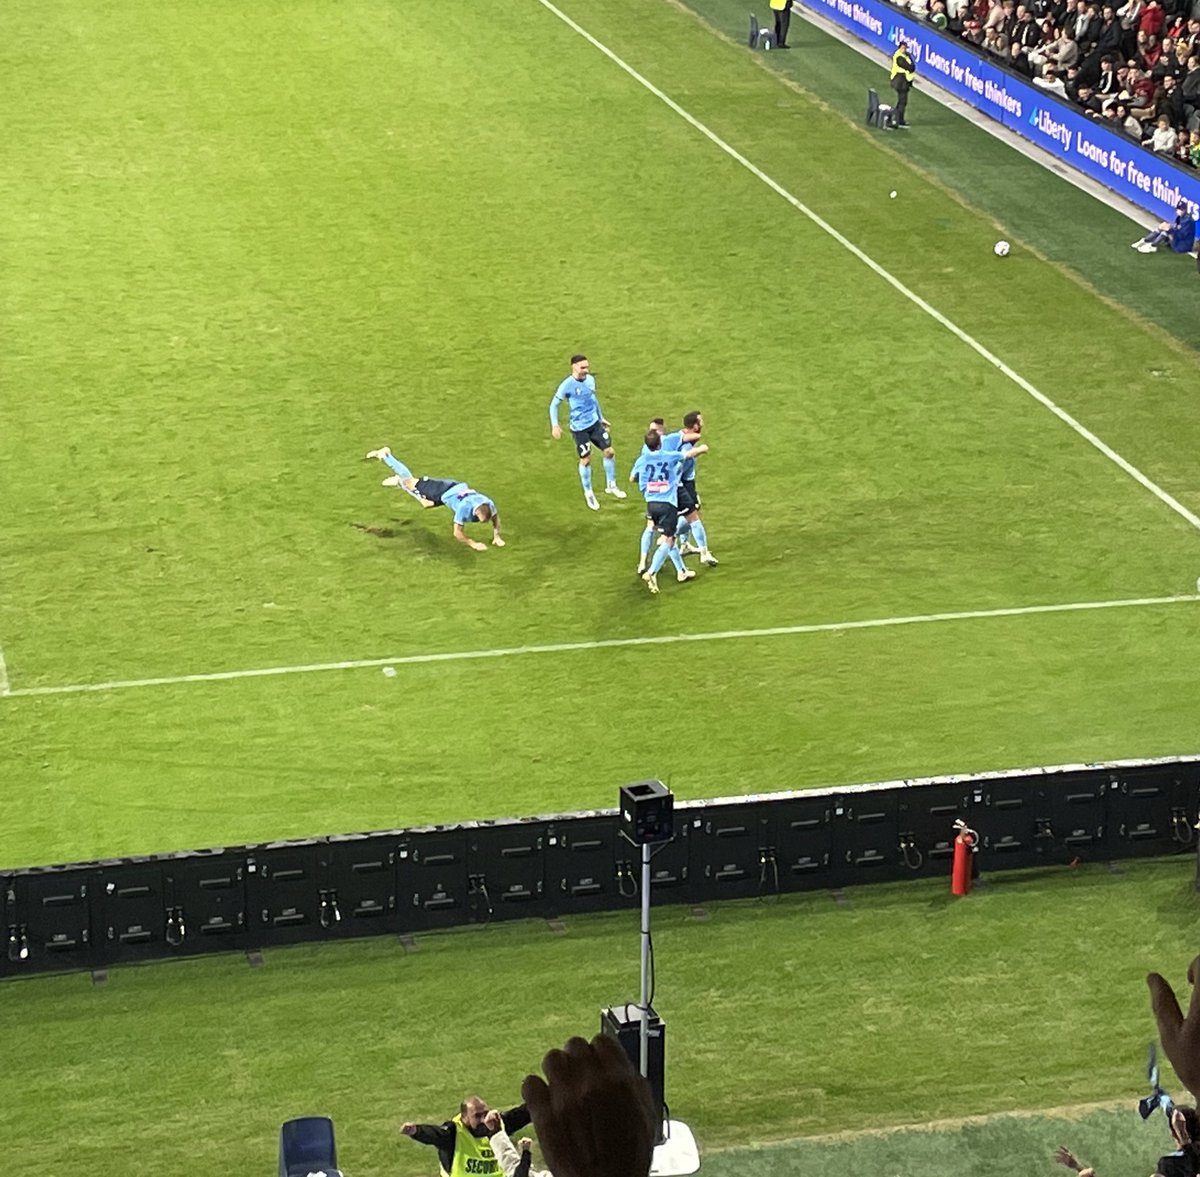 The moment Bratten’s celebration went horribly wrong! 🤣🤣 #SydneyDerby